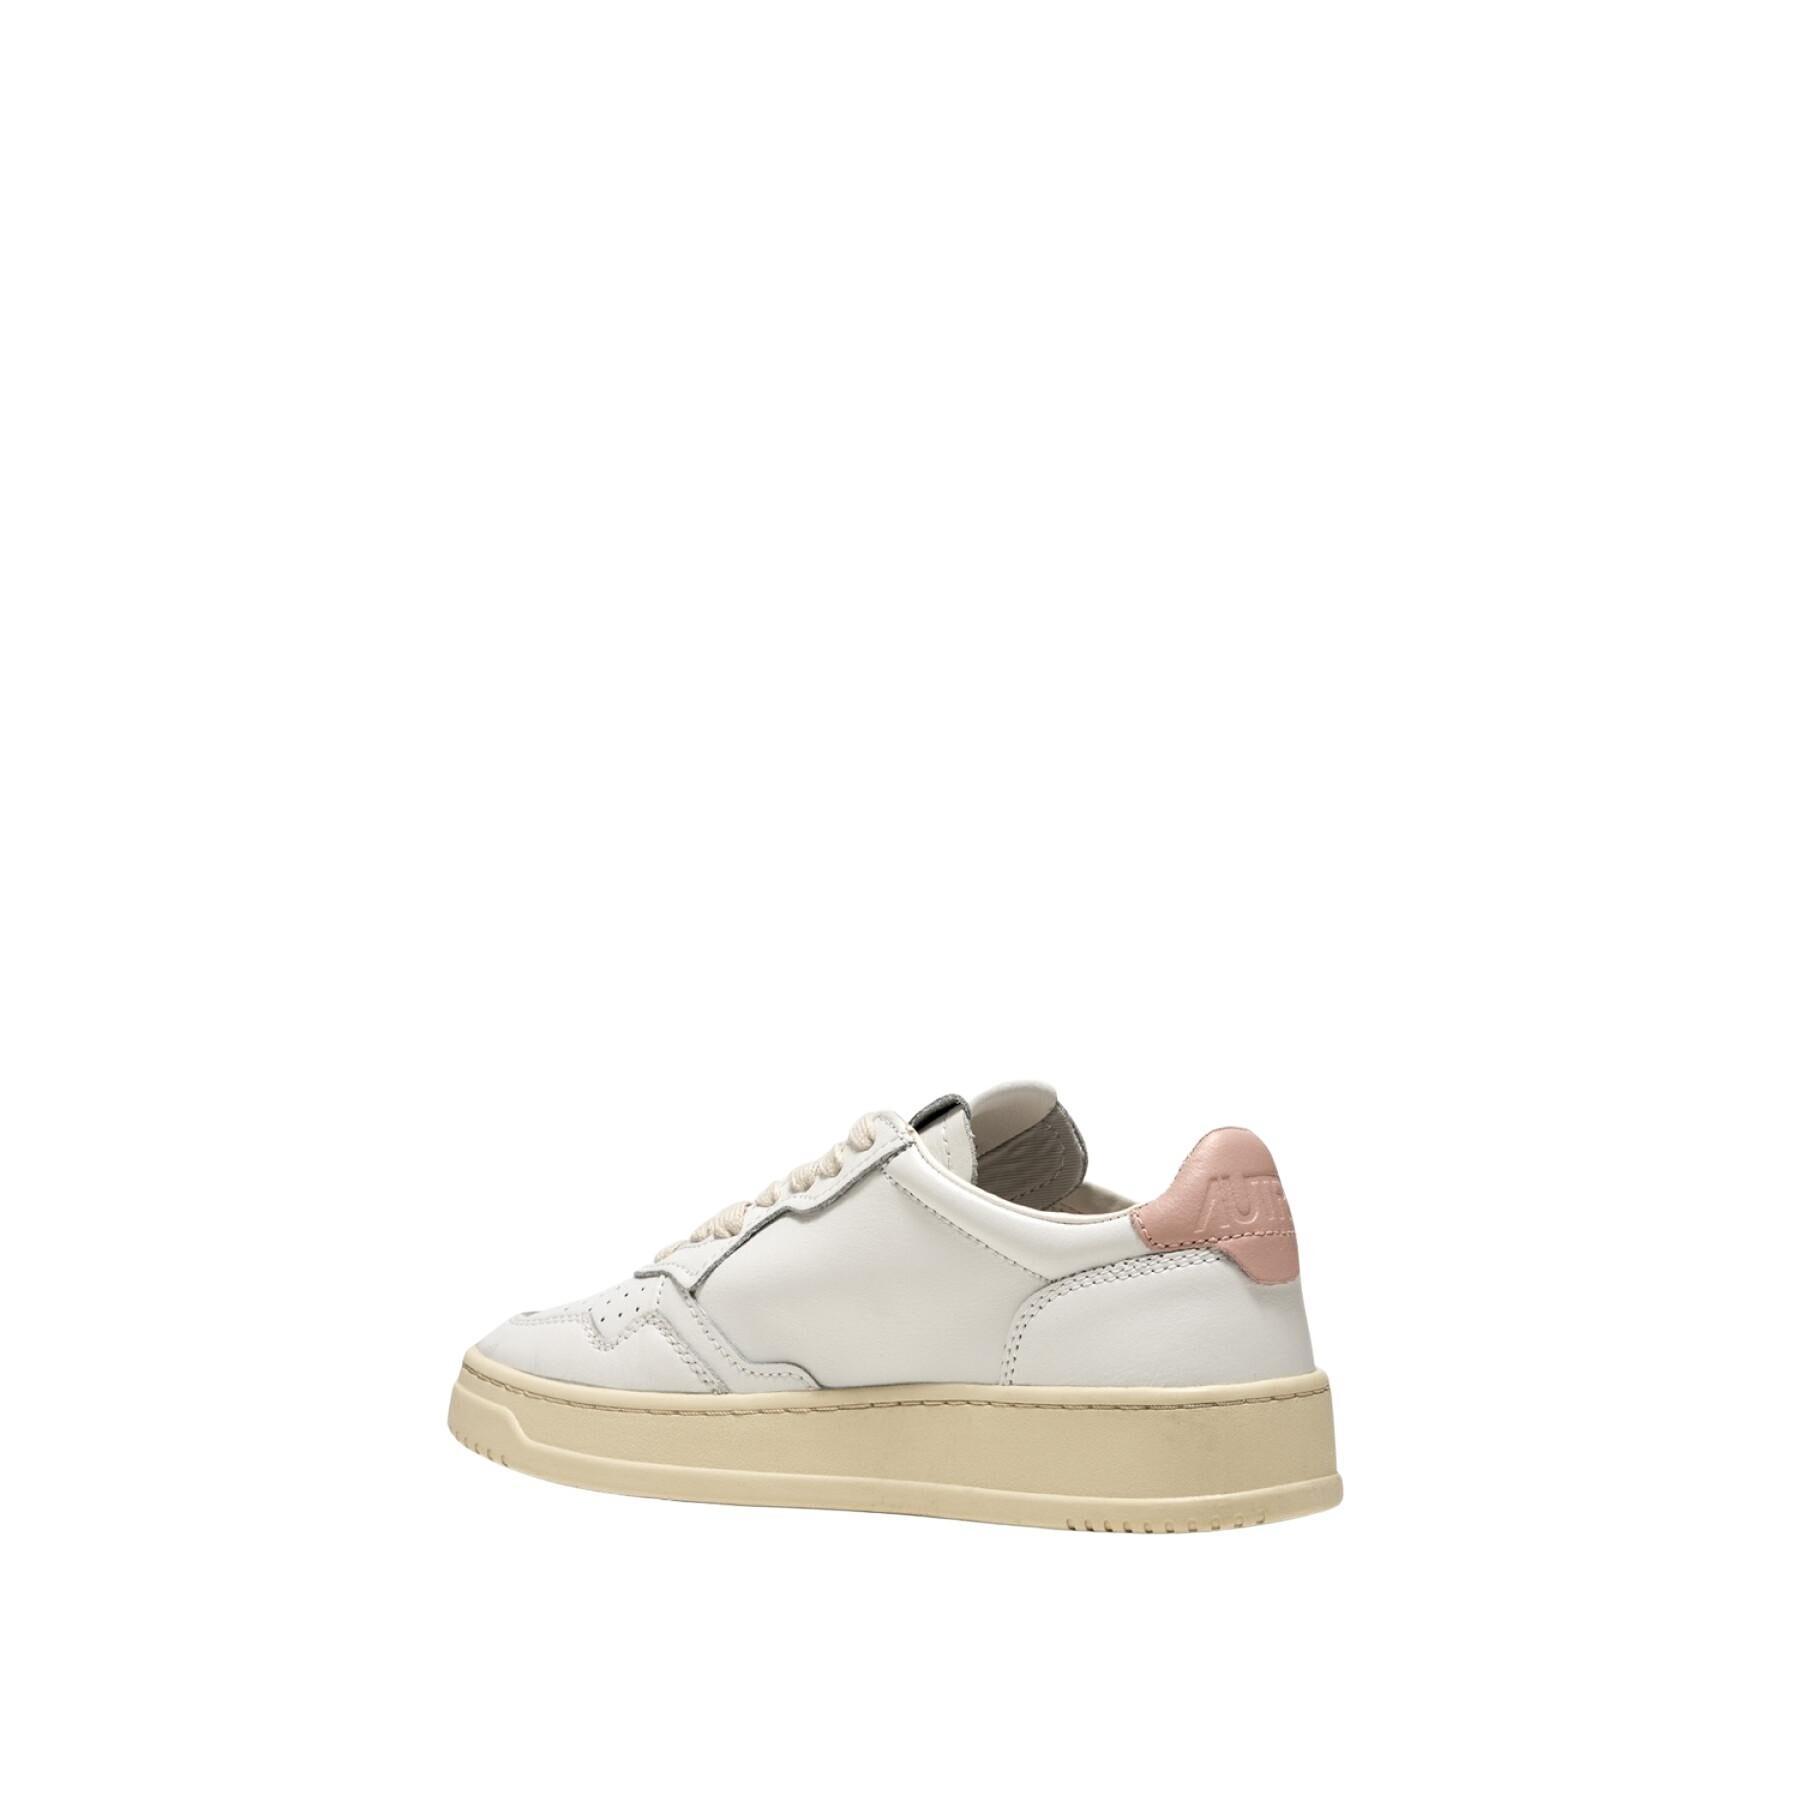 Women's sneakers Autry Medalist LL16 Leather White Pink